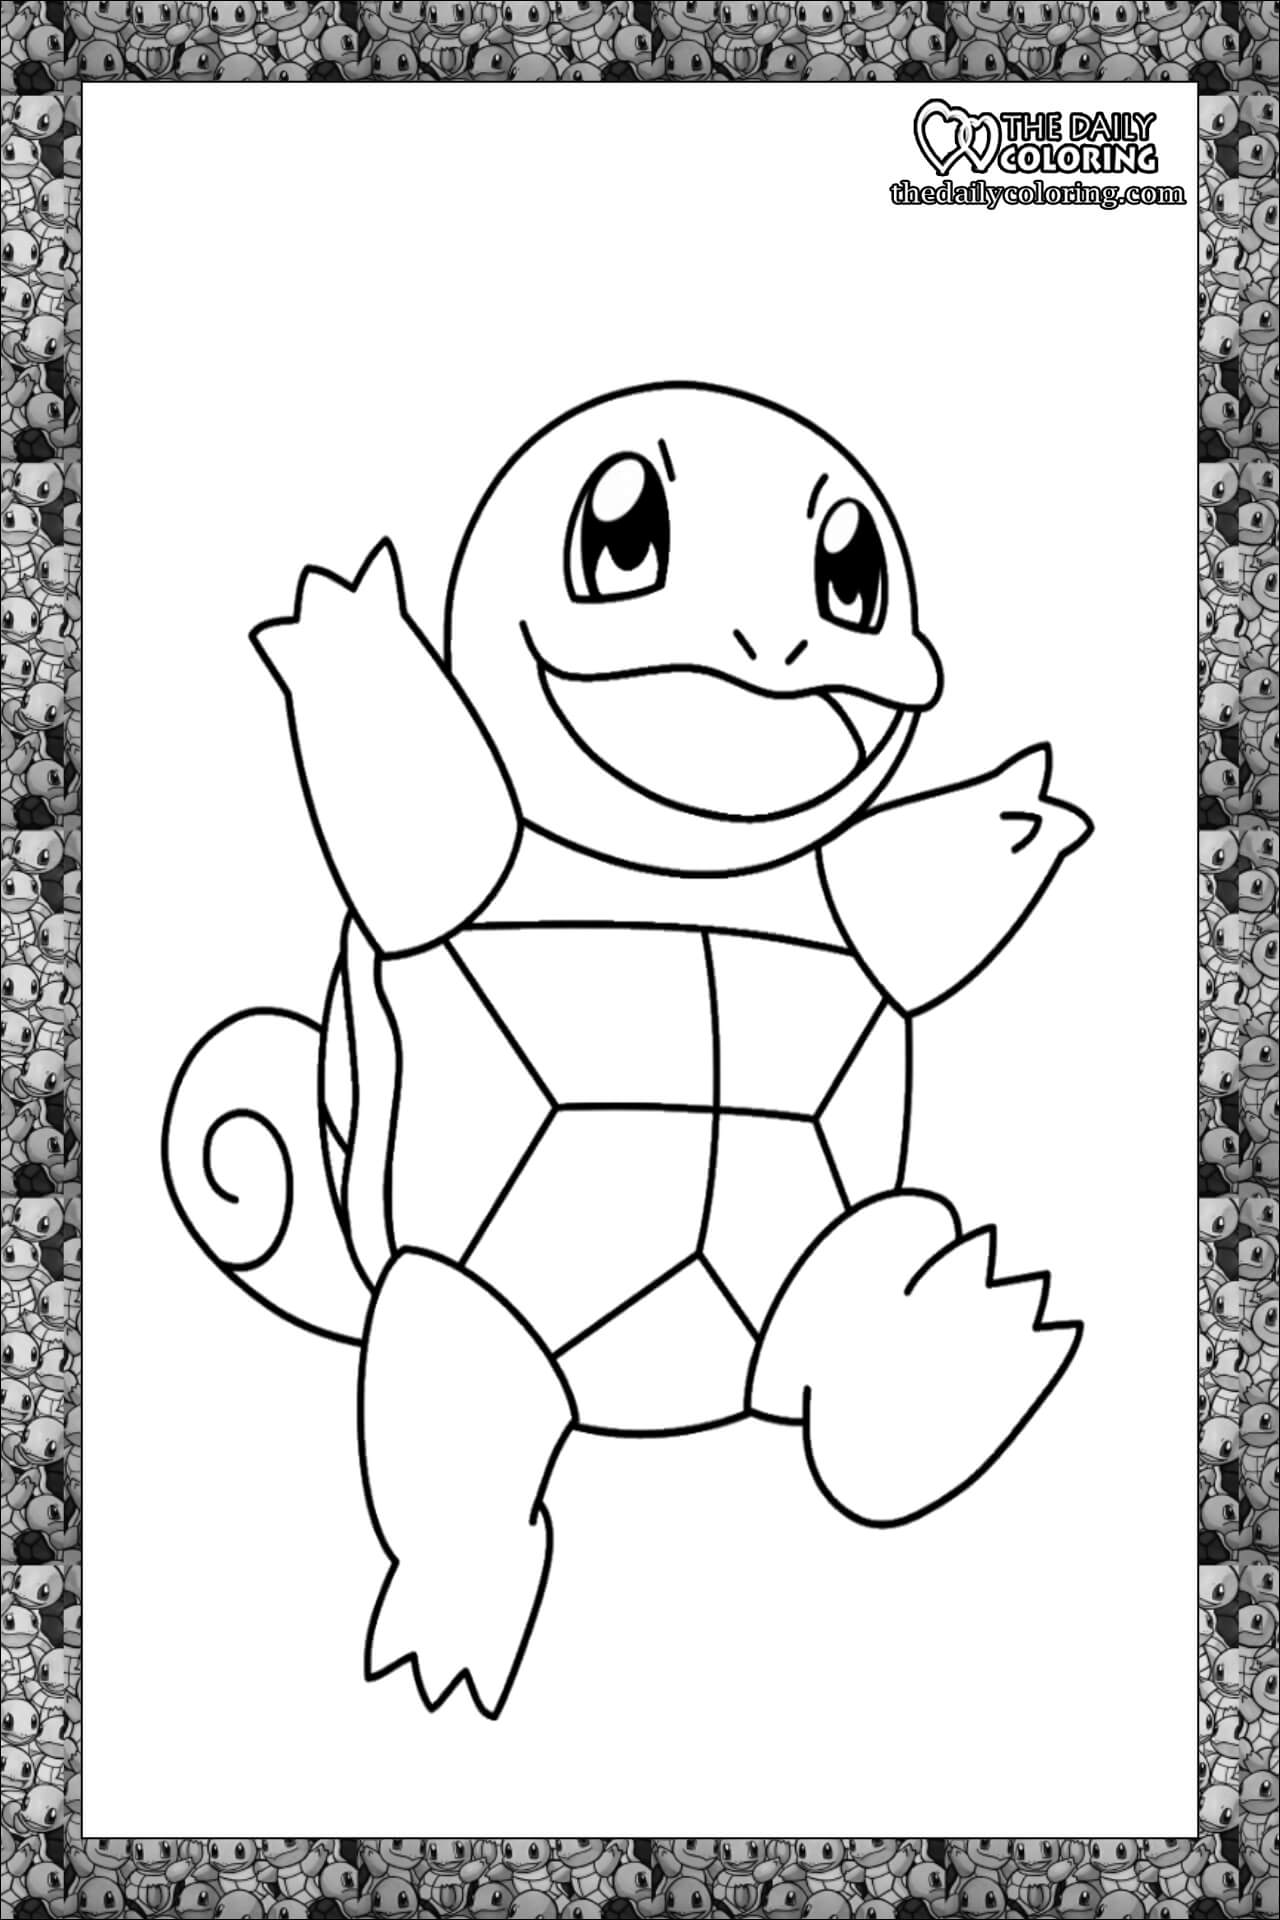 squirtle-coloring-page